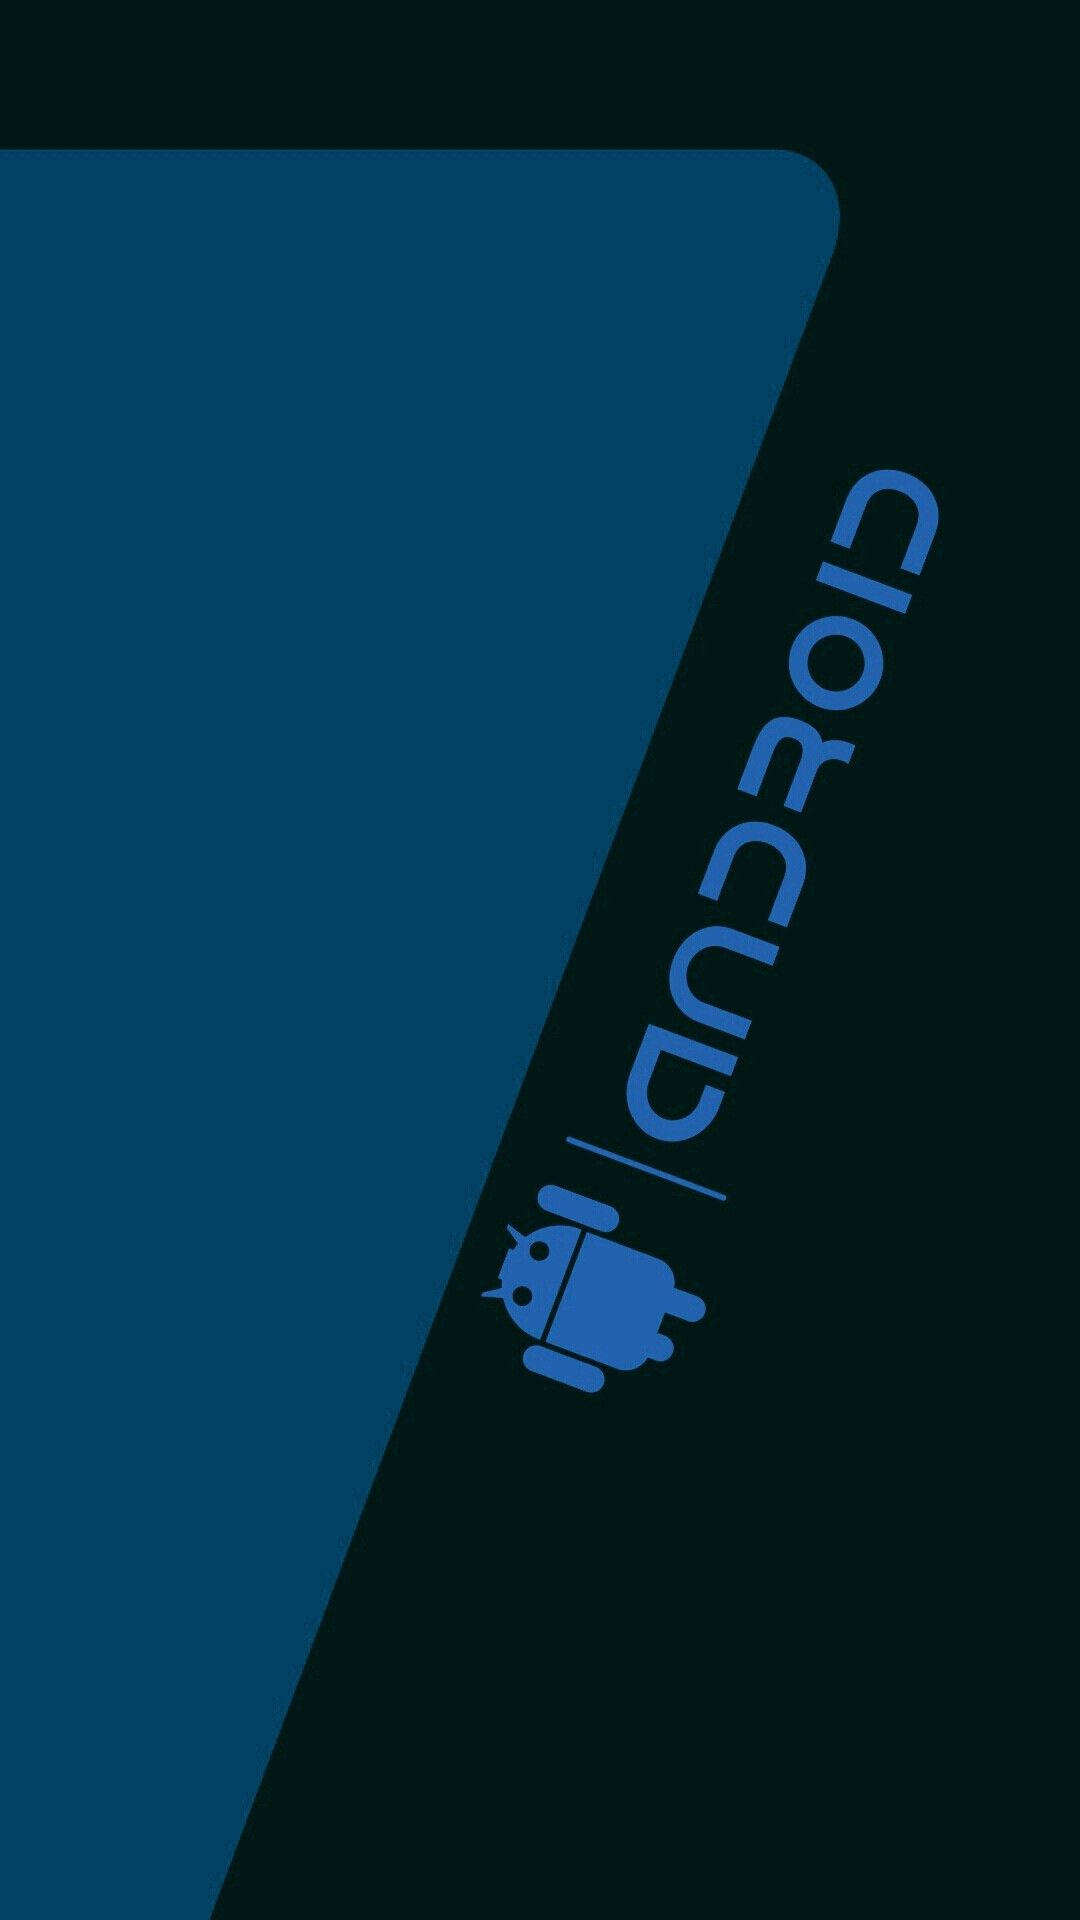 Blue And Black Android Developer Wallpaper